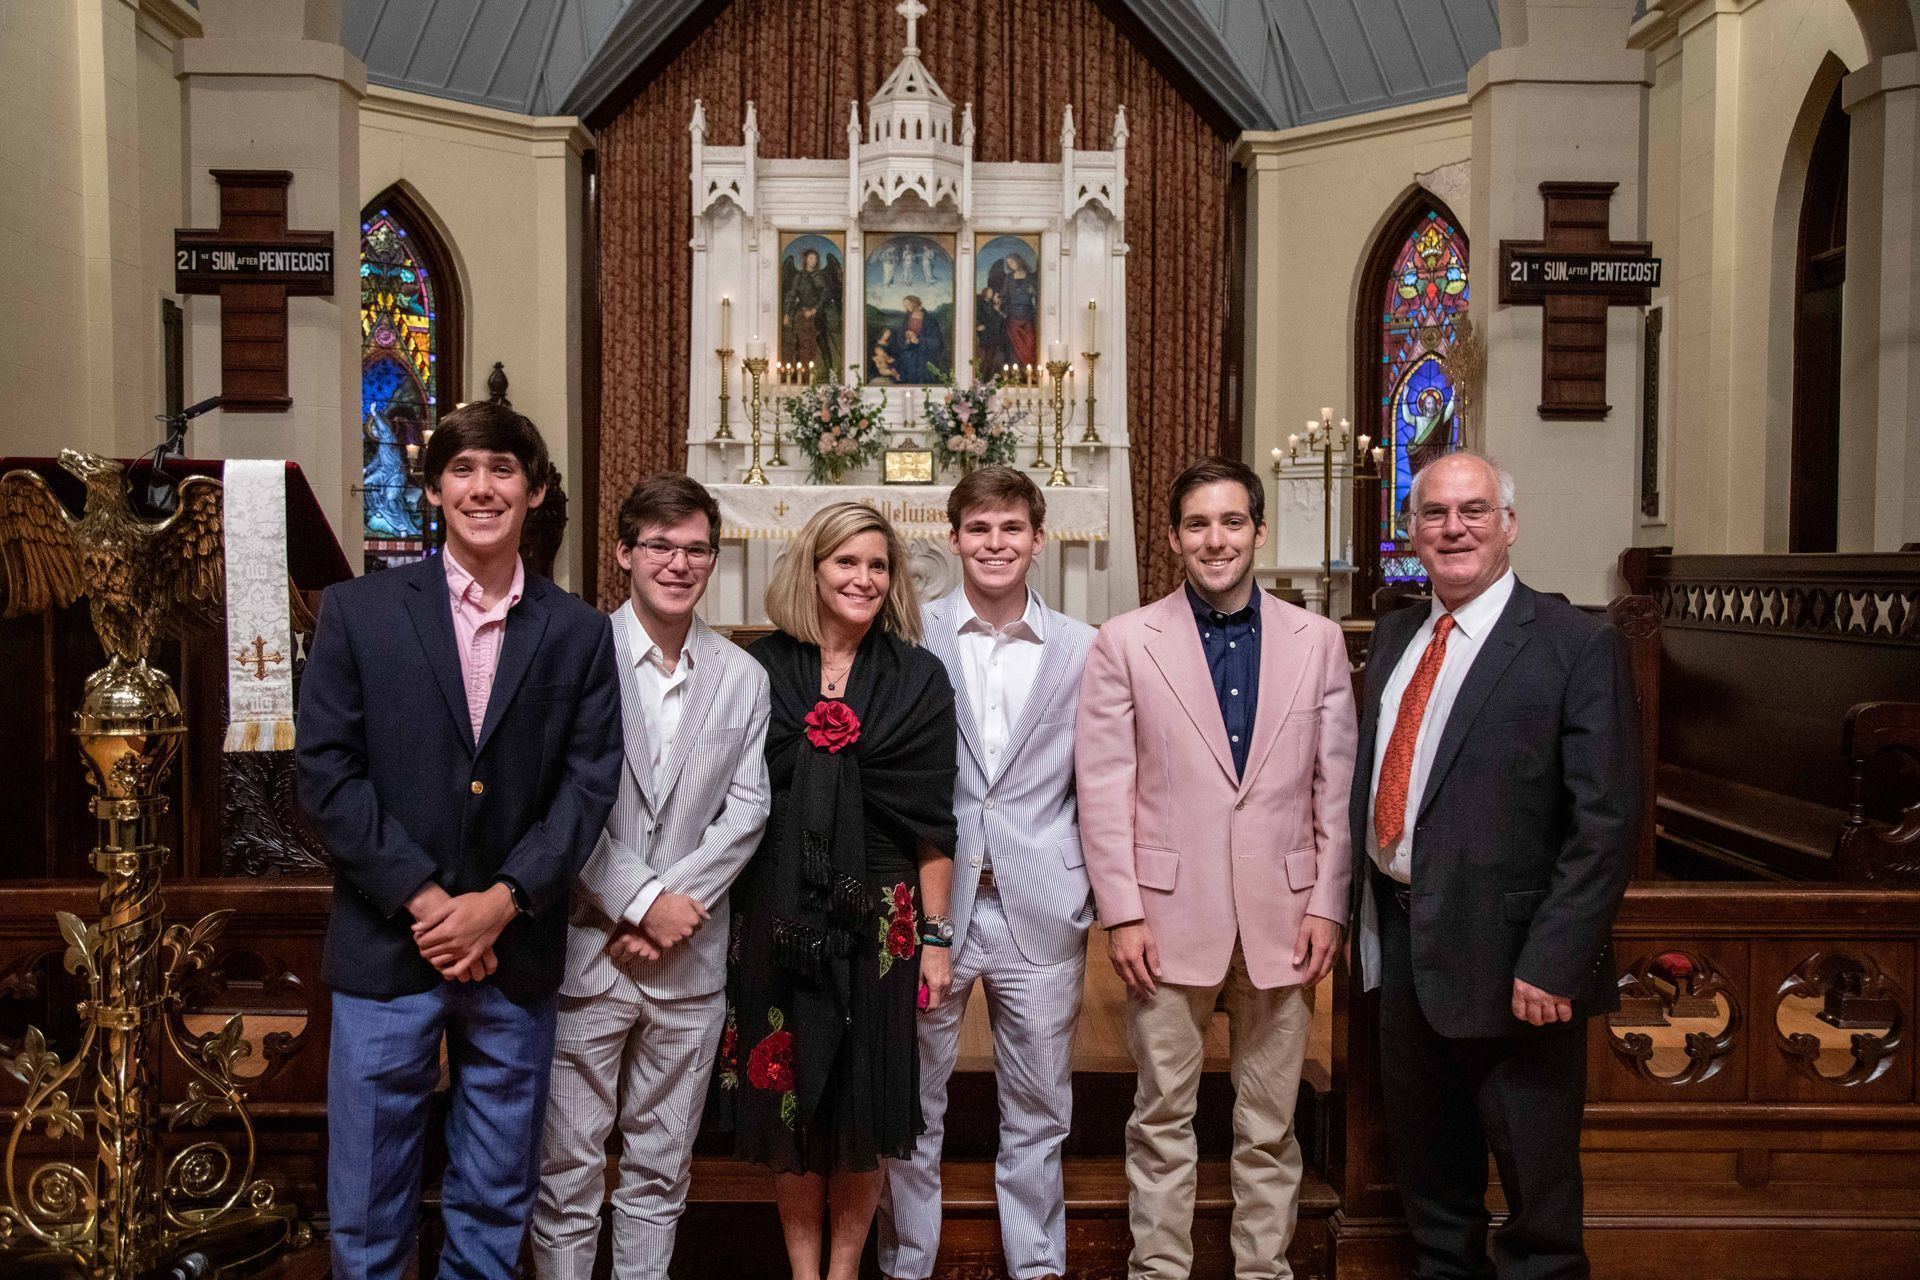 Dr. Jeff's family stands in front of an altar in a church